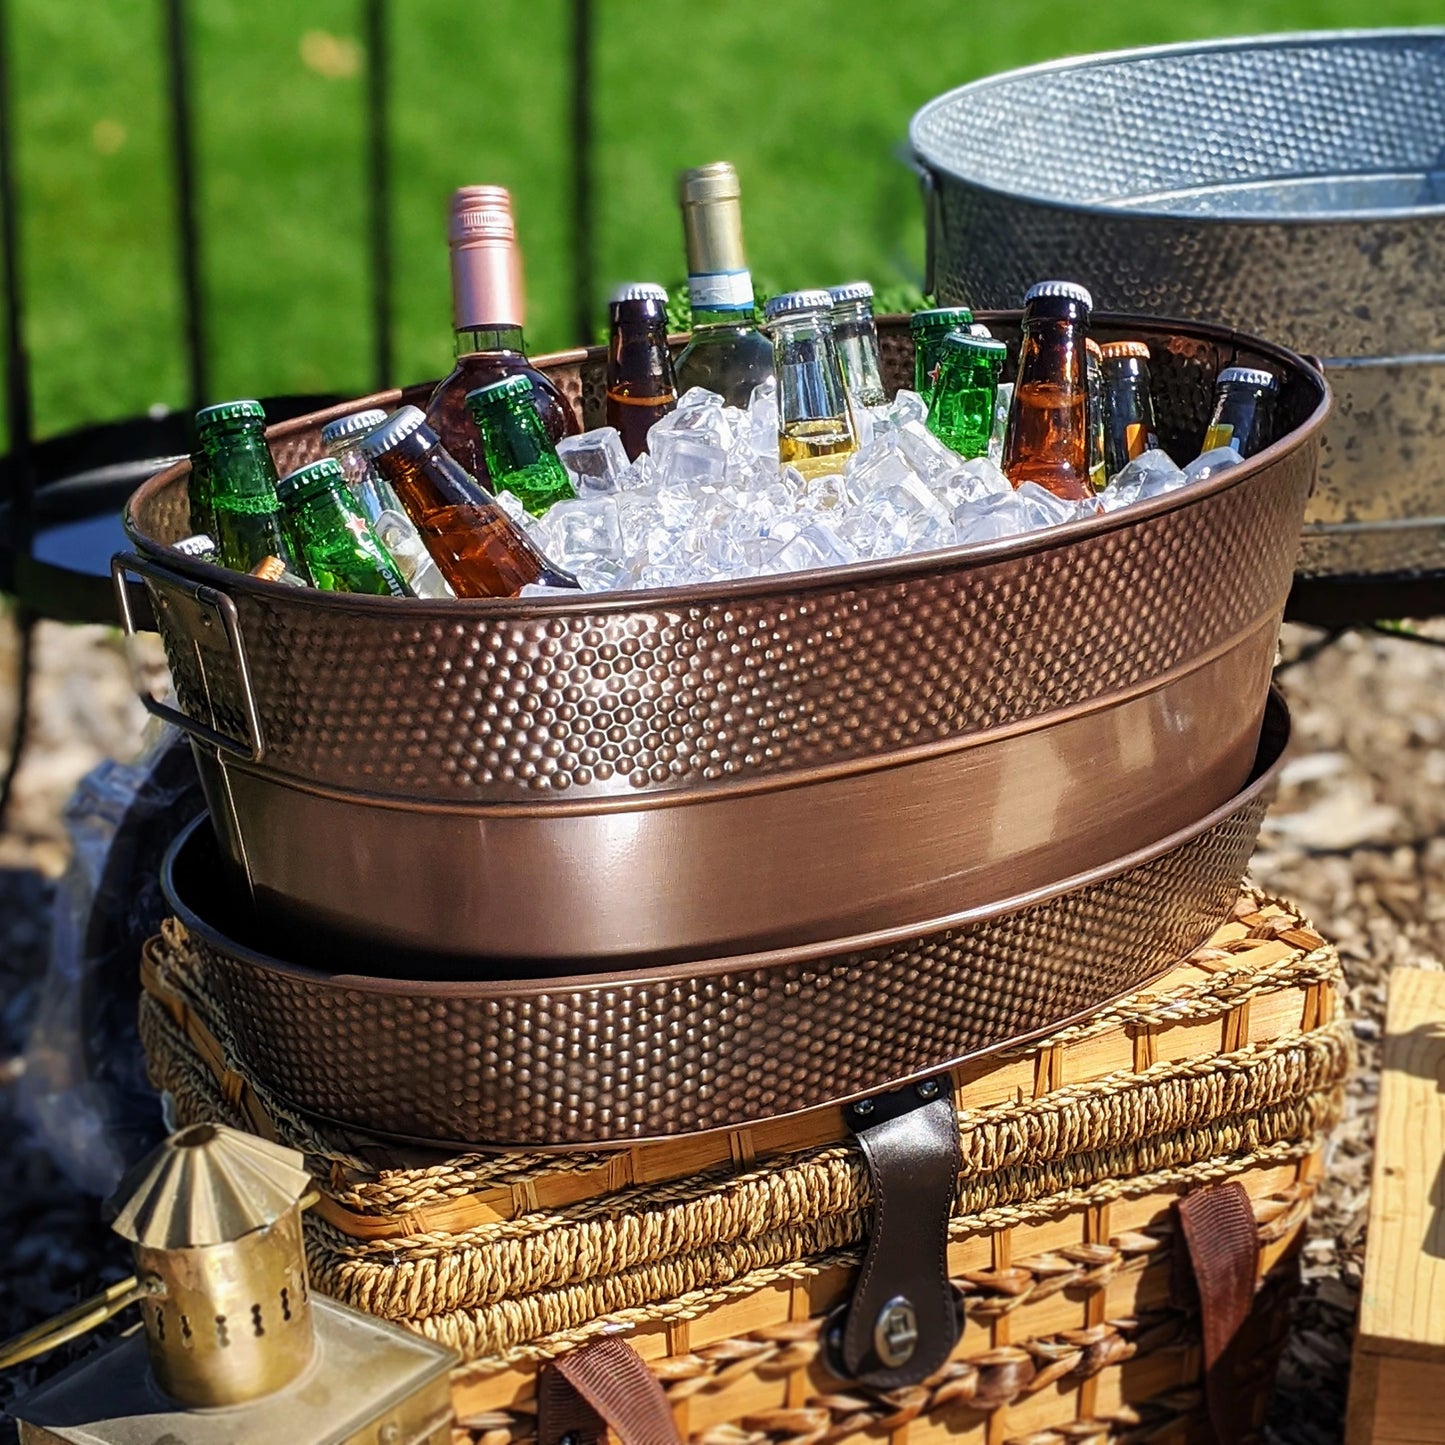 Metal tray for large party tub to catch spills and splashes and party tub condensation.